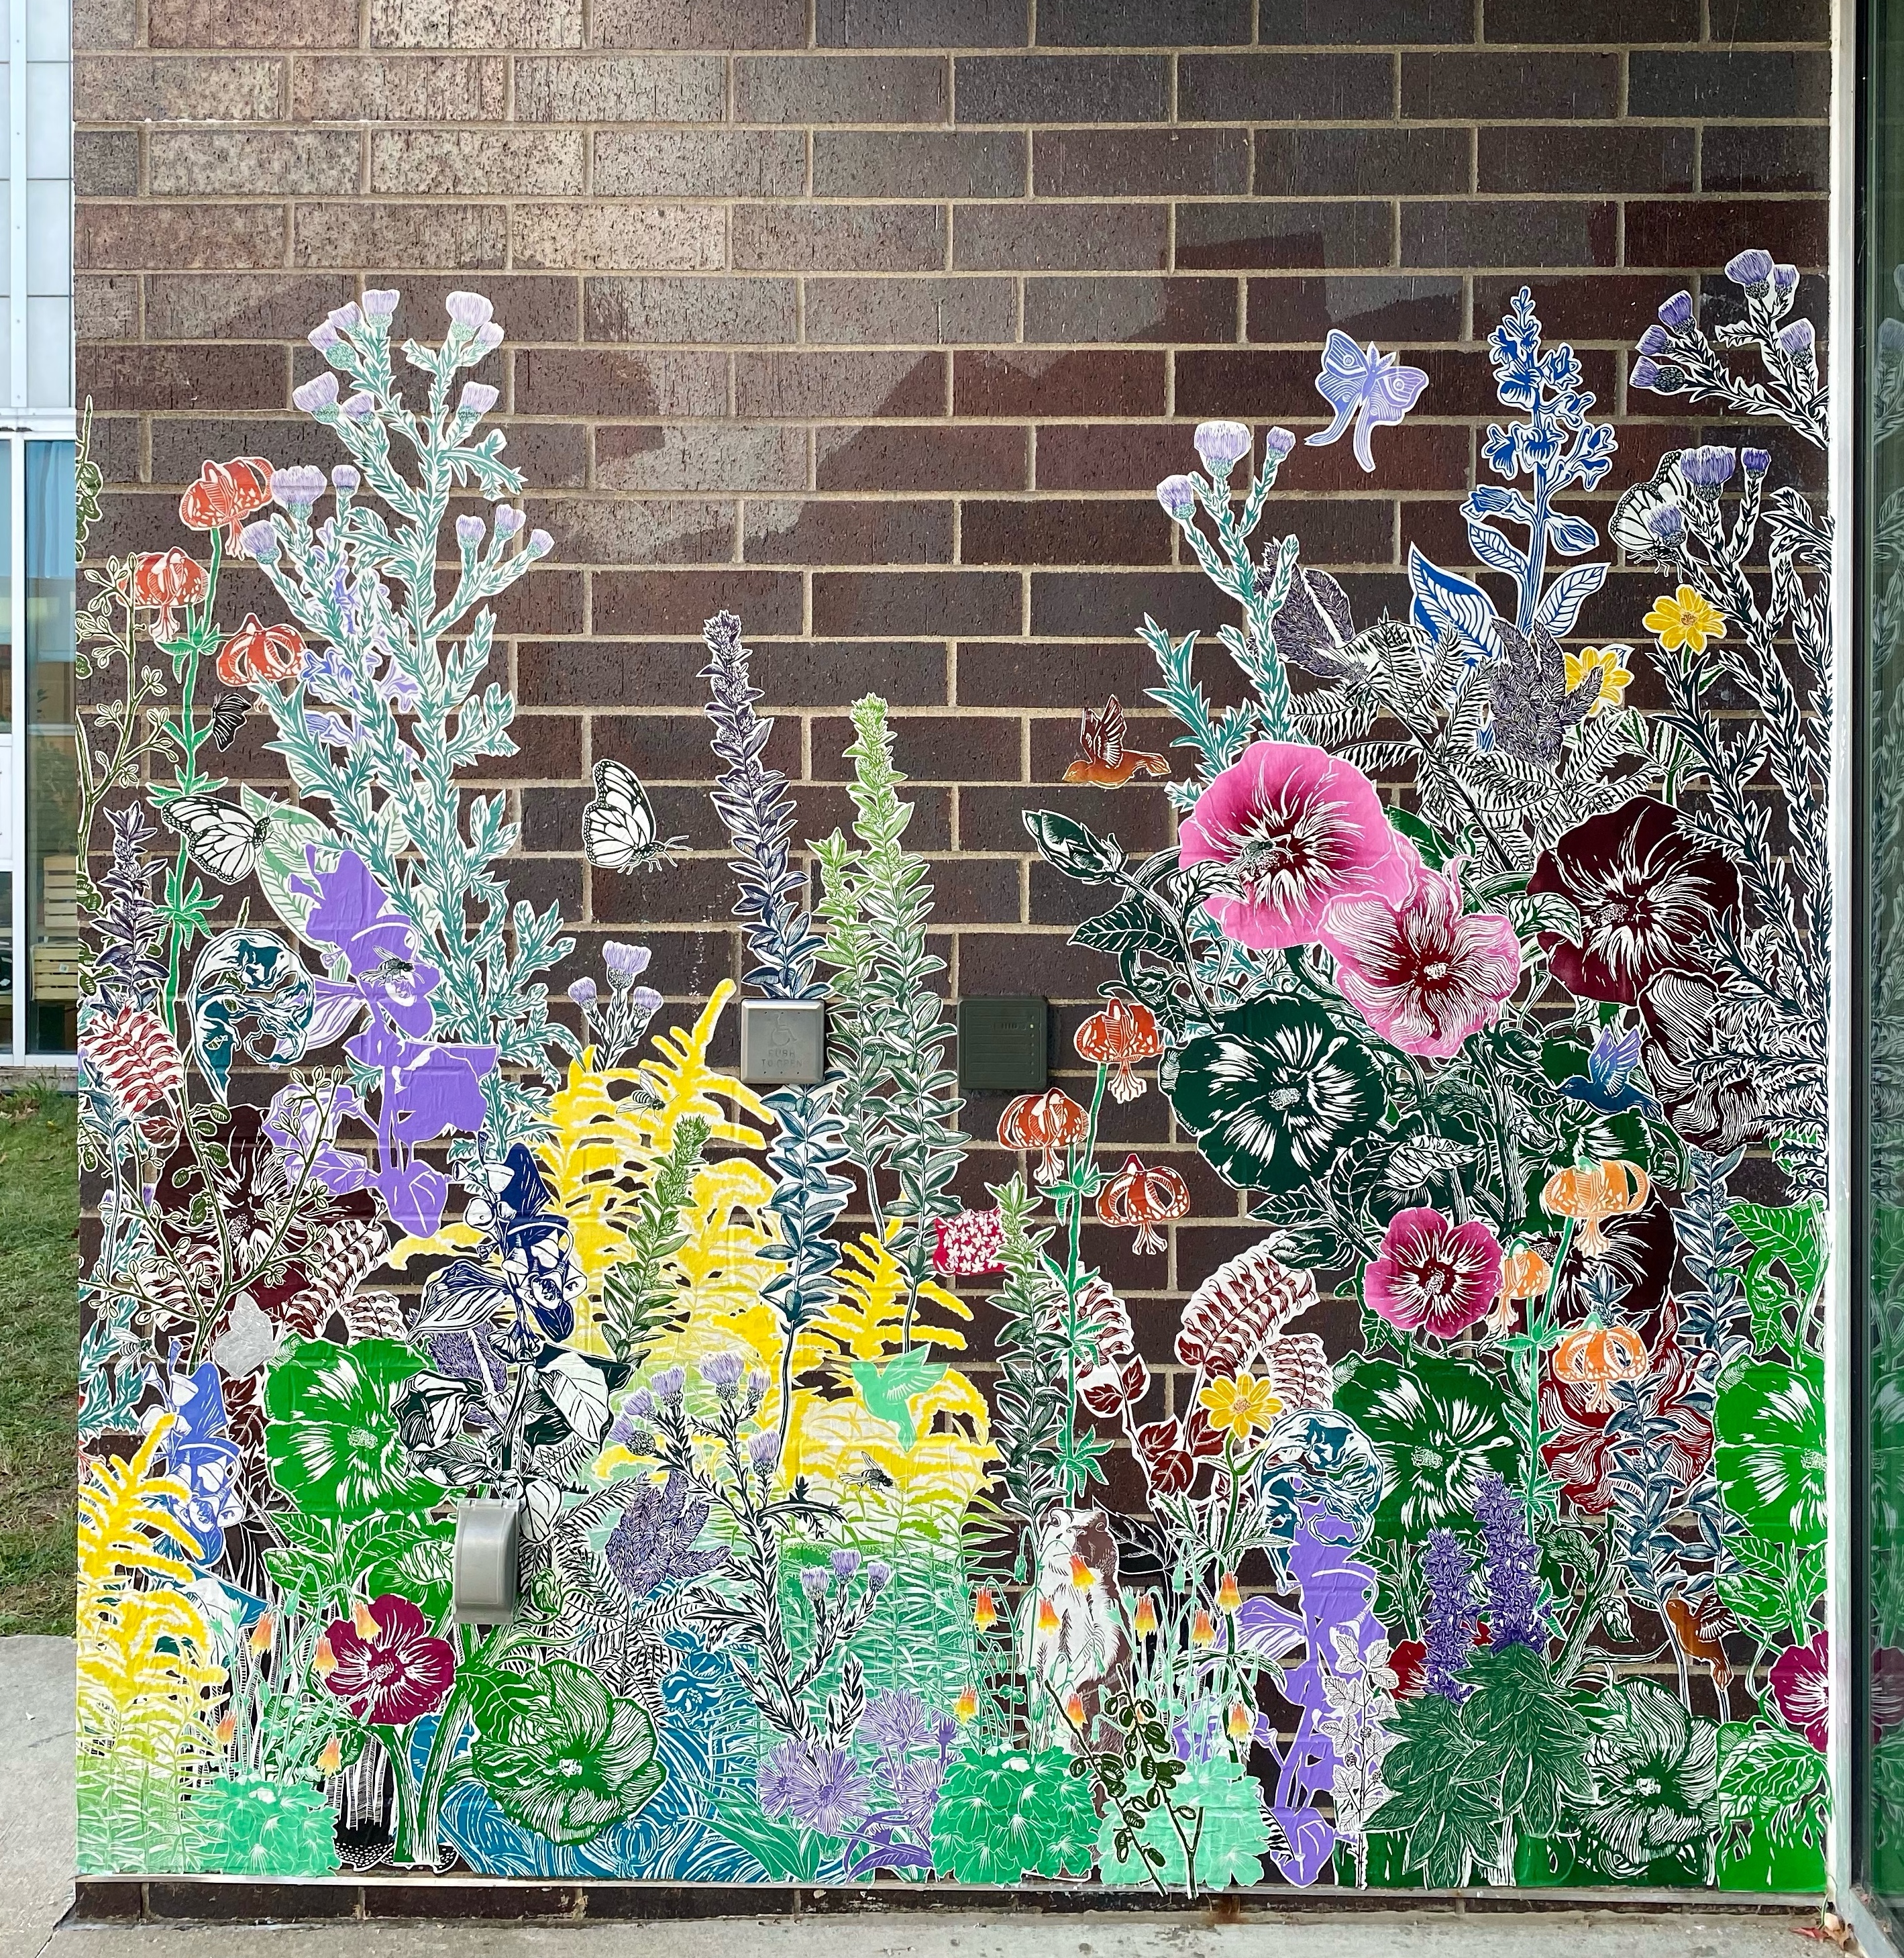 Look at this beautiful paste-up mural U of I art students made